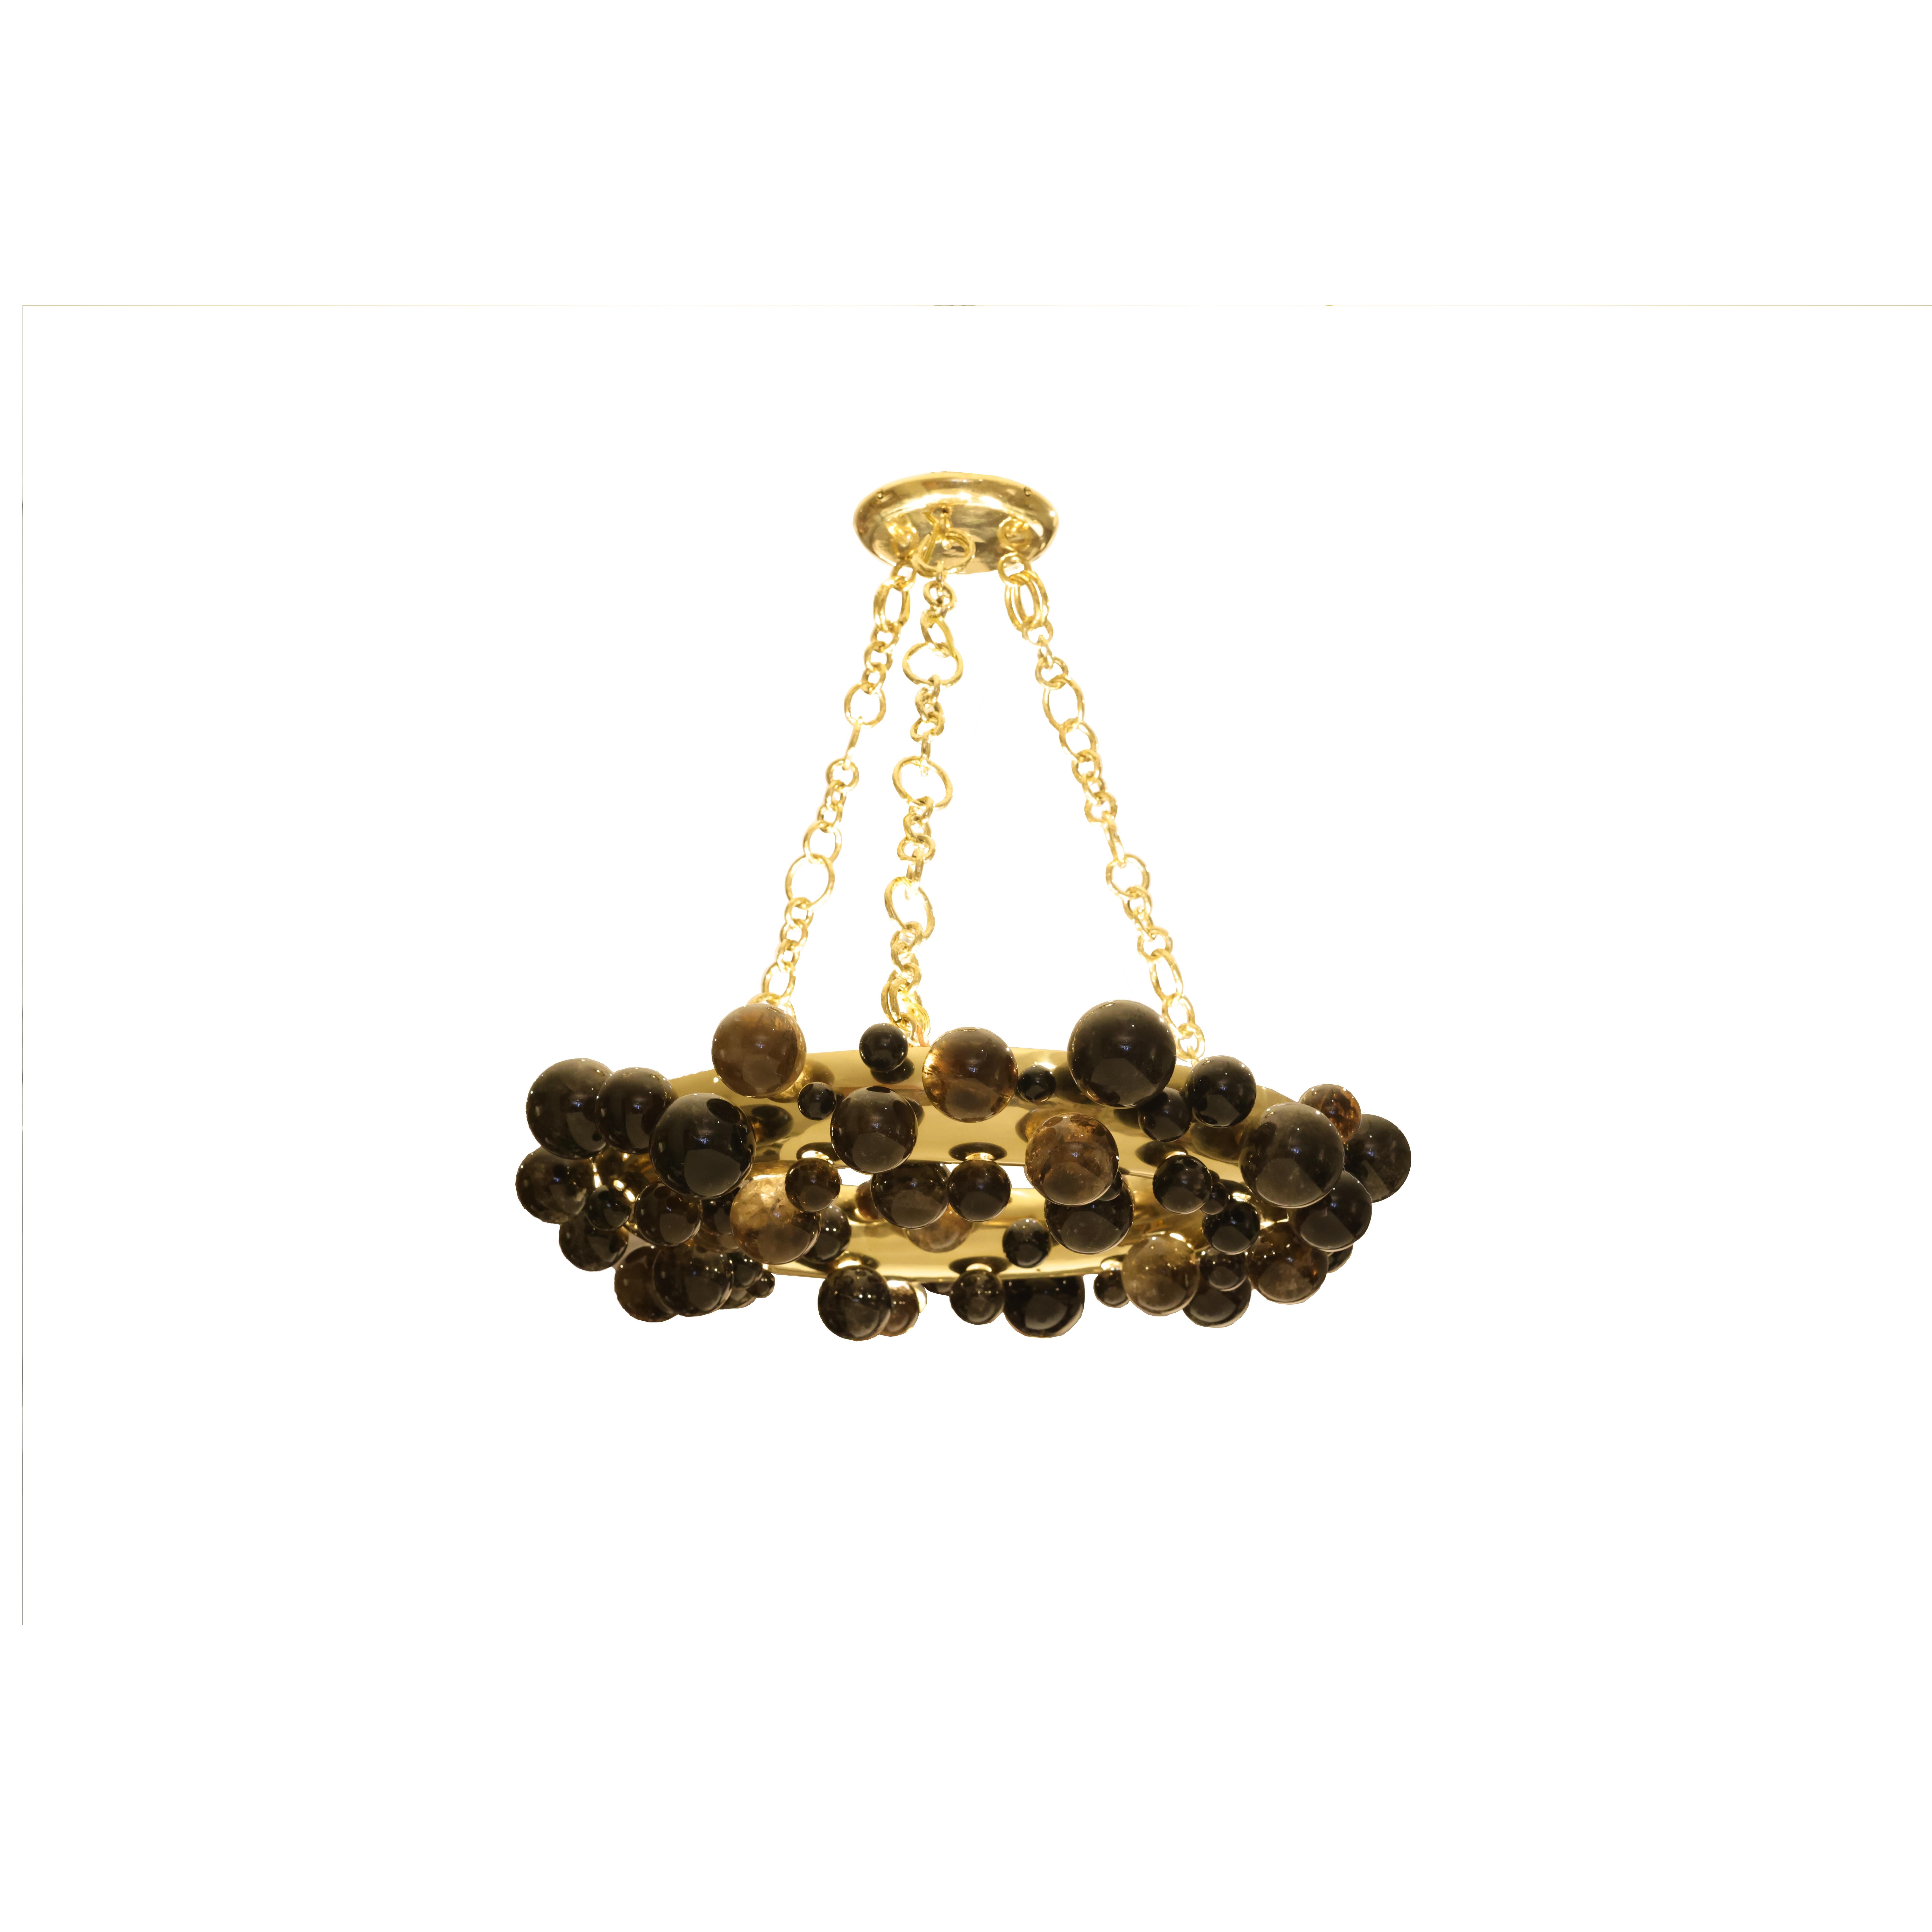 Bubble ring rock crystal chandelier by Phoenix with polish brass frame. Created by Phoenix Gallery, NYC.
Each chandelier install 16 sockets. Use 60w LED warm light bulbs. Total of 960w. 
Custom size and metal finish upon request.
 